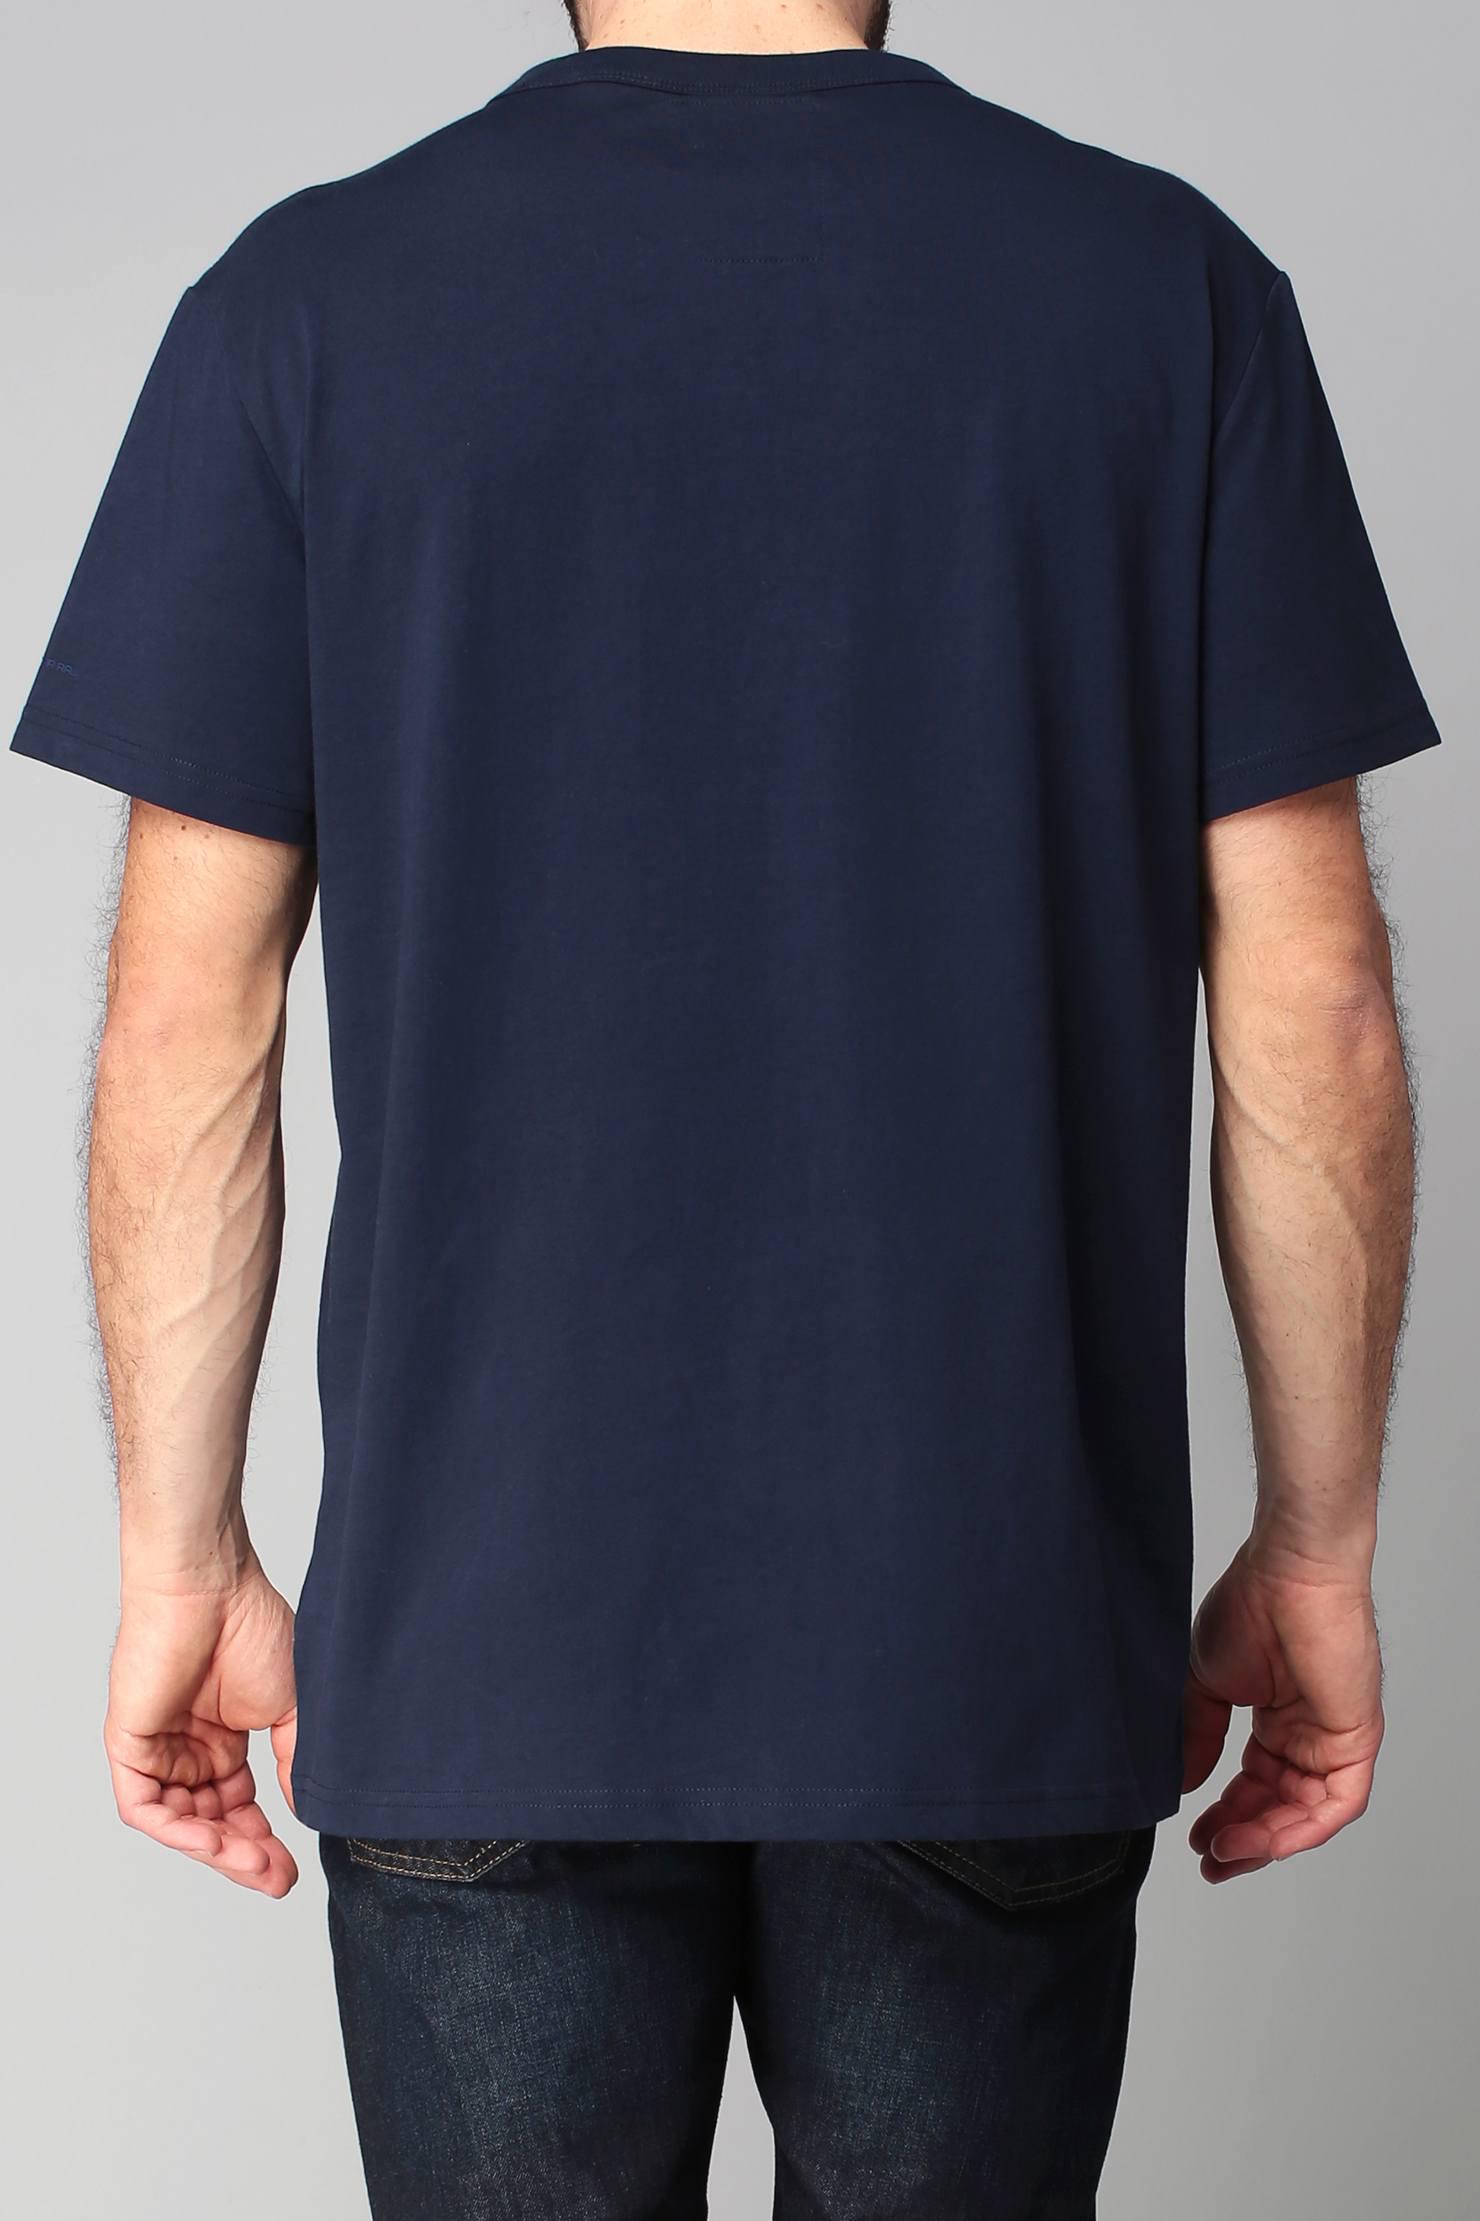 Lyst - G-star raw T-shirt in Blue for Men